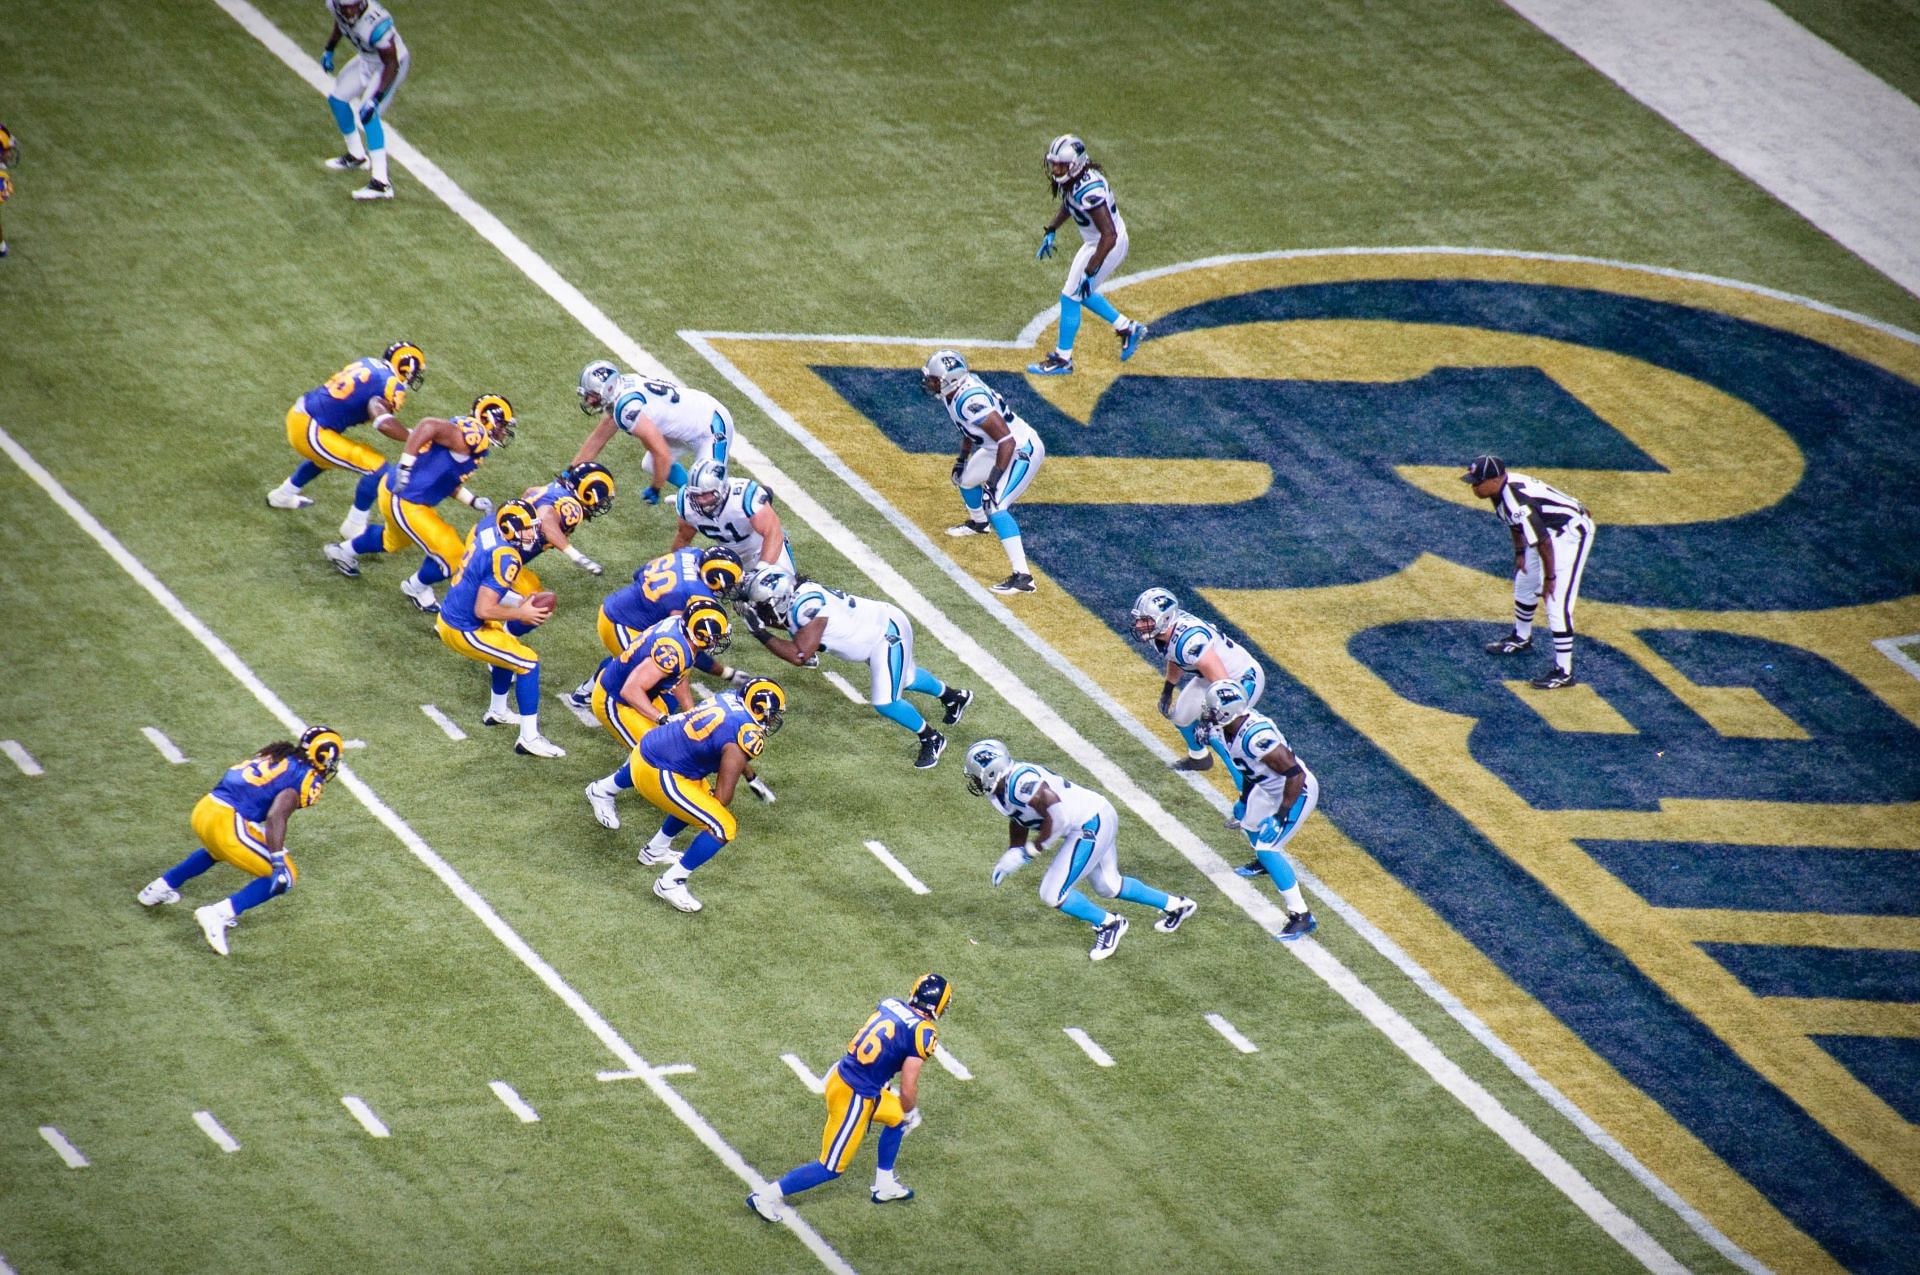 The St Louis Rams playing the Carolina Panthers back in 2010